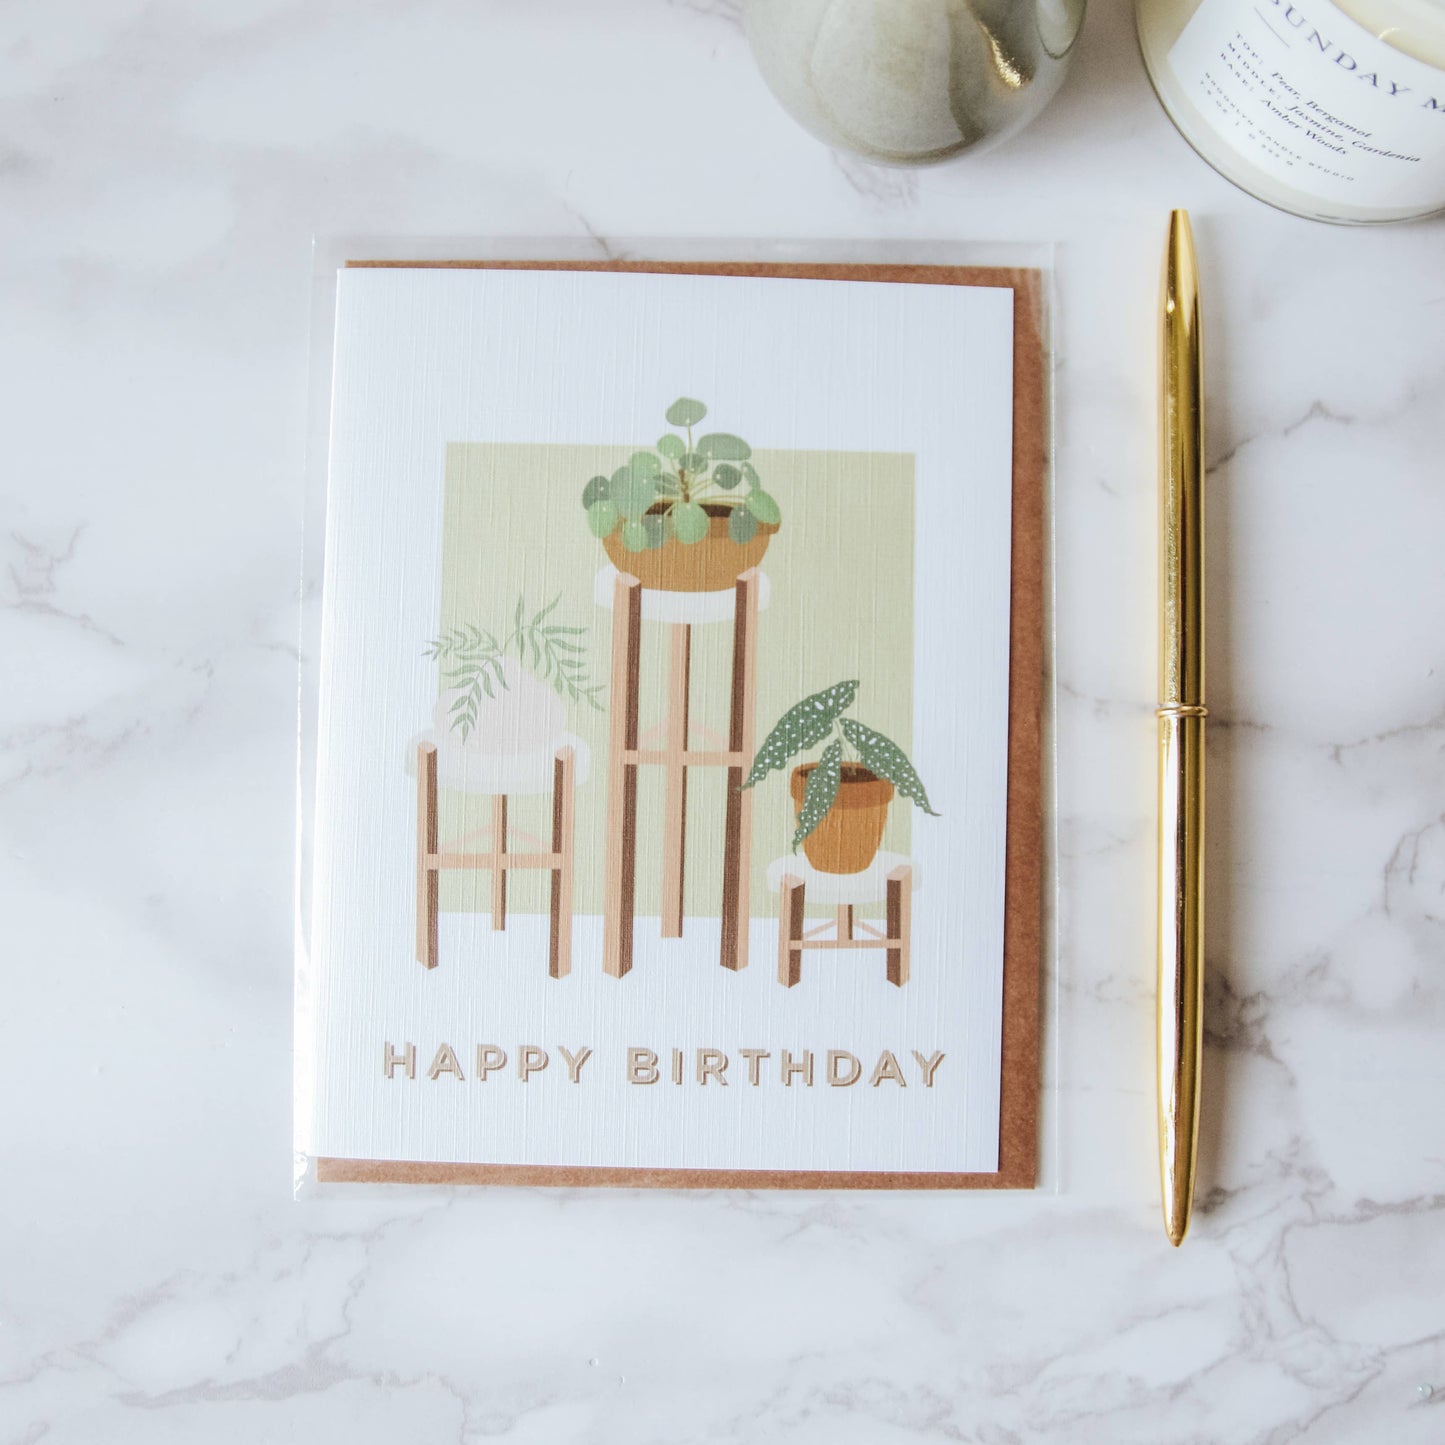 Potted Plants Birthday Card